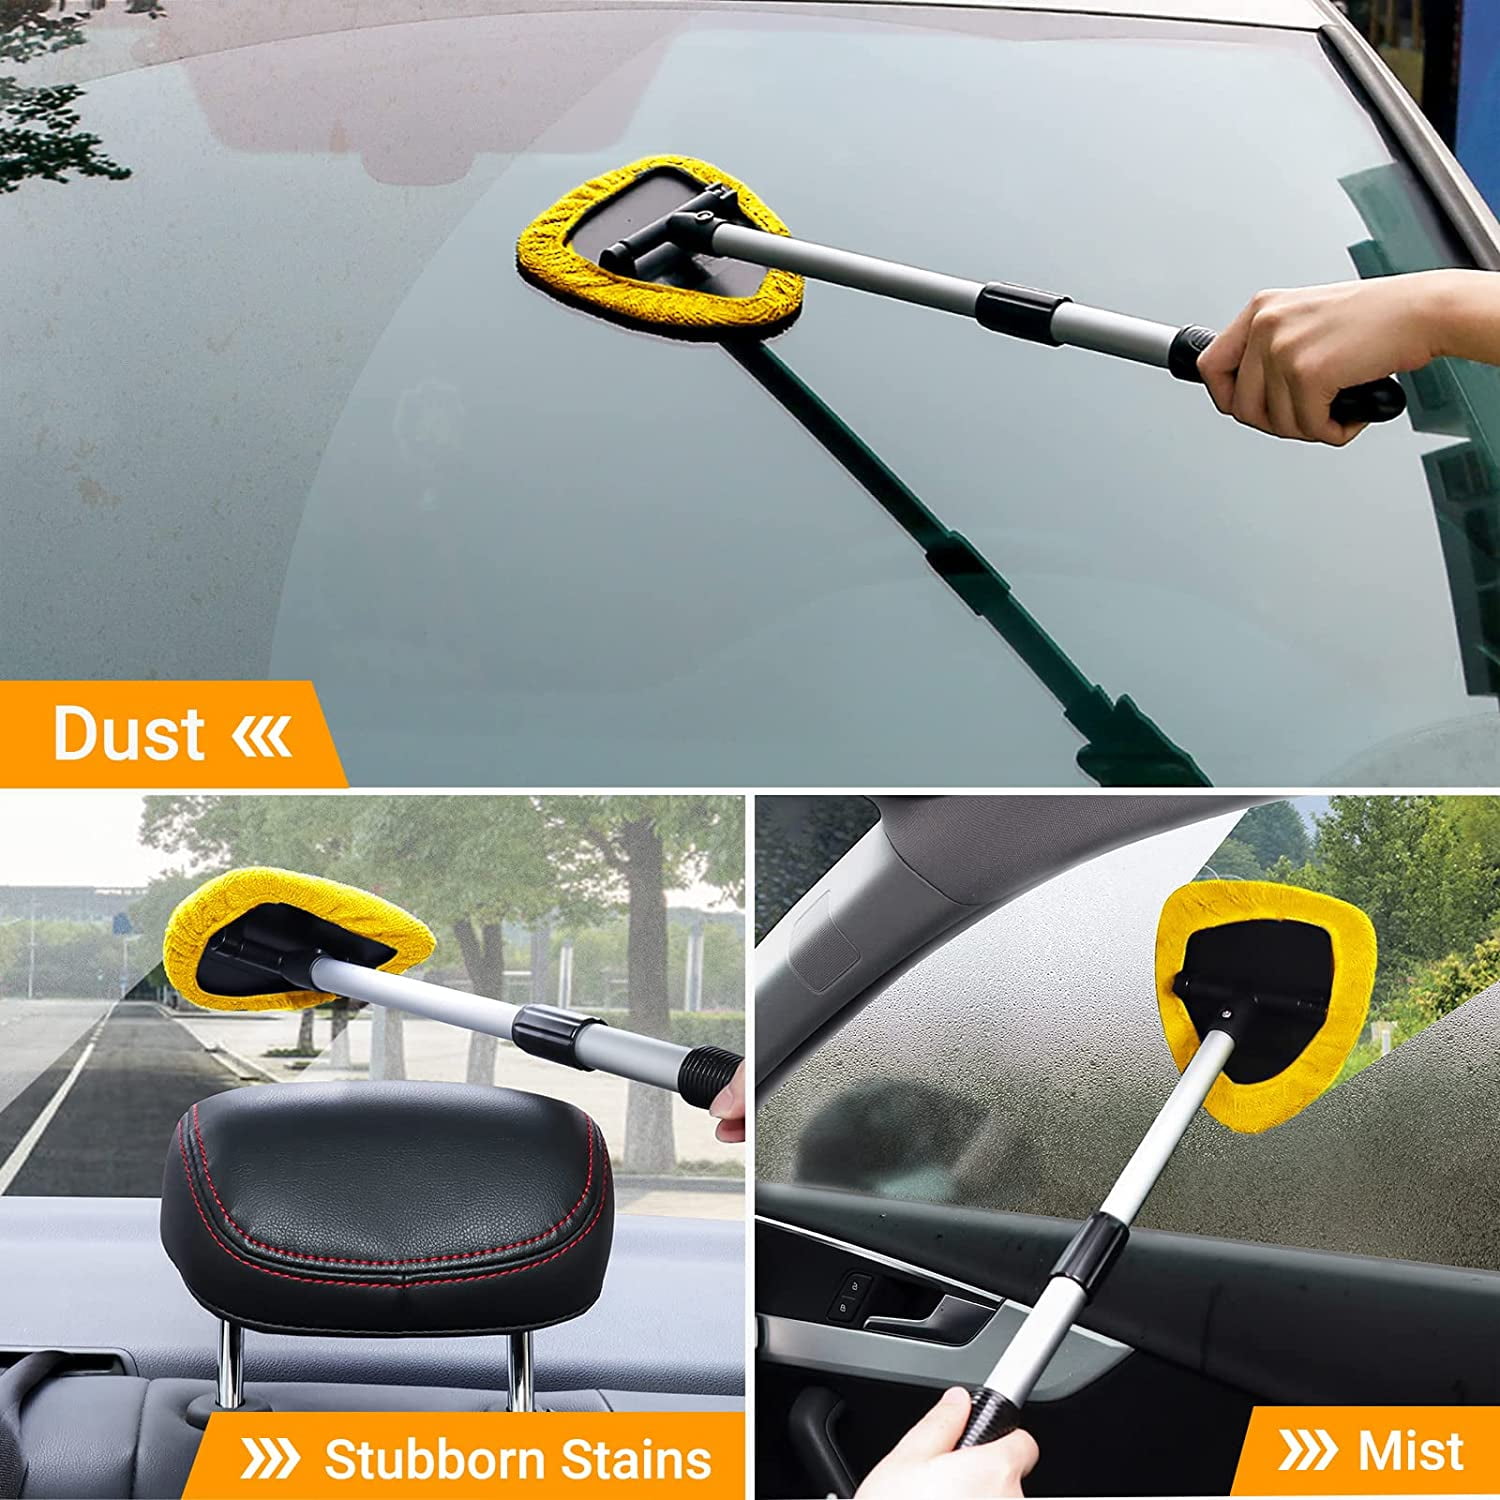 Smile Turtle Car Windshield Cleaner Wand Cleaning Kit Interior,Car Window Cleaning Tools for Wiper Fluid and Defogging,Invisible Glass Cleaner Automotive Tools